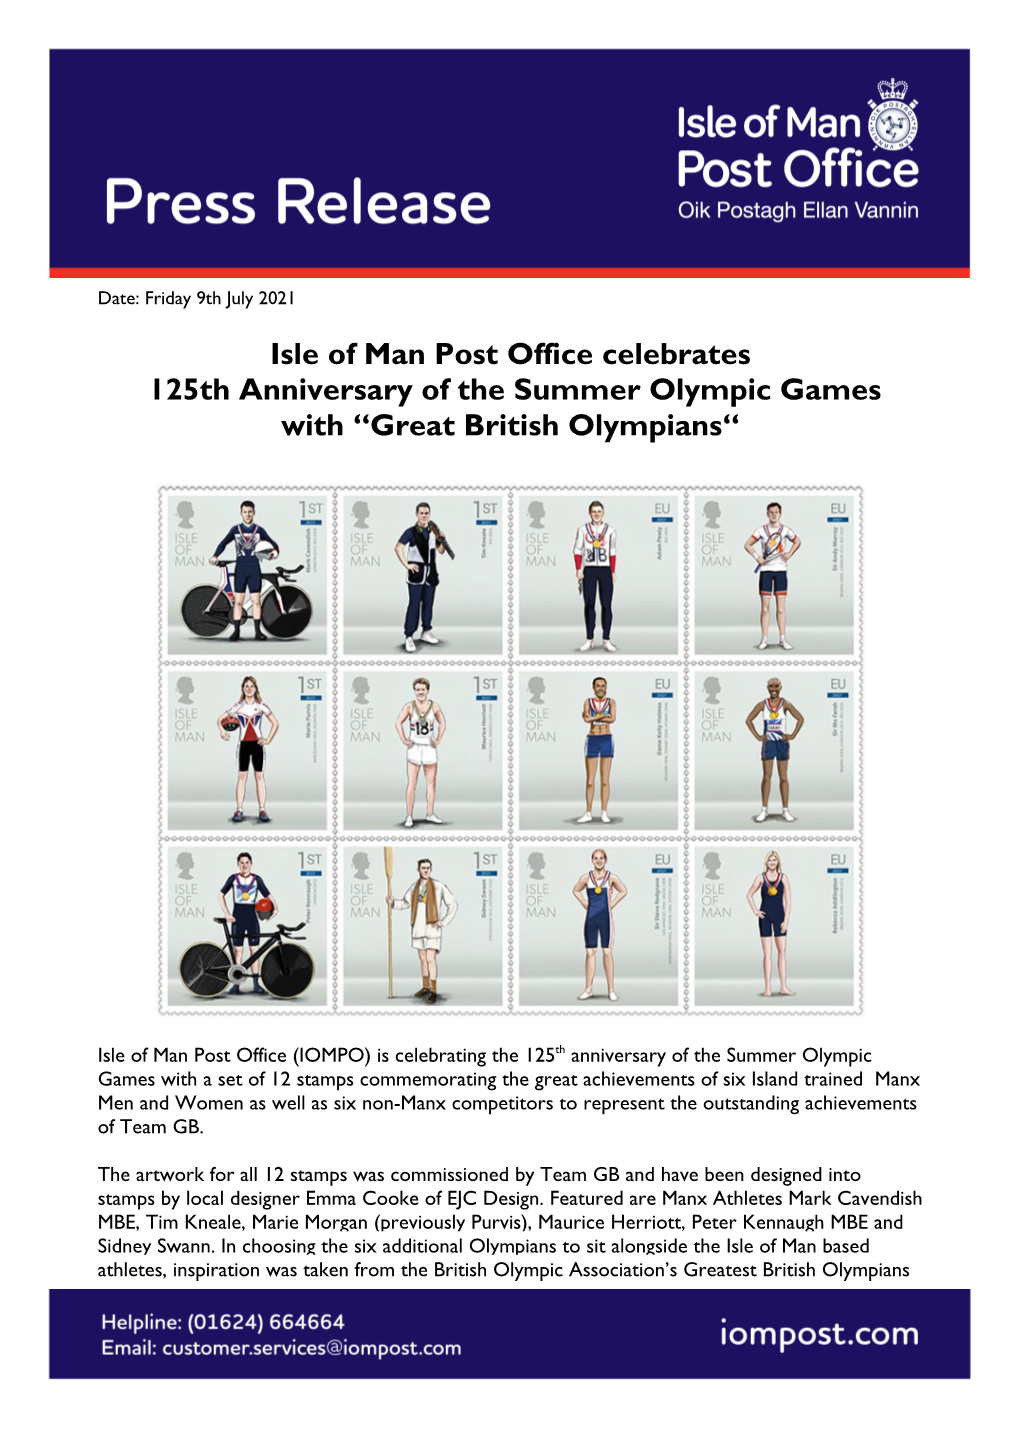 Isle of Man Post Office Celebrates 125Th Anniversary of the Summer Olympic Games with “Great British Olympians“